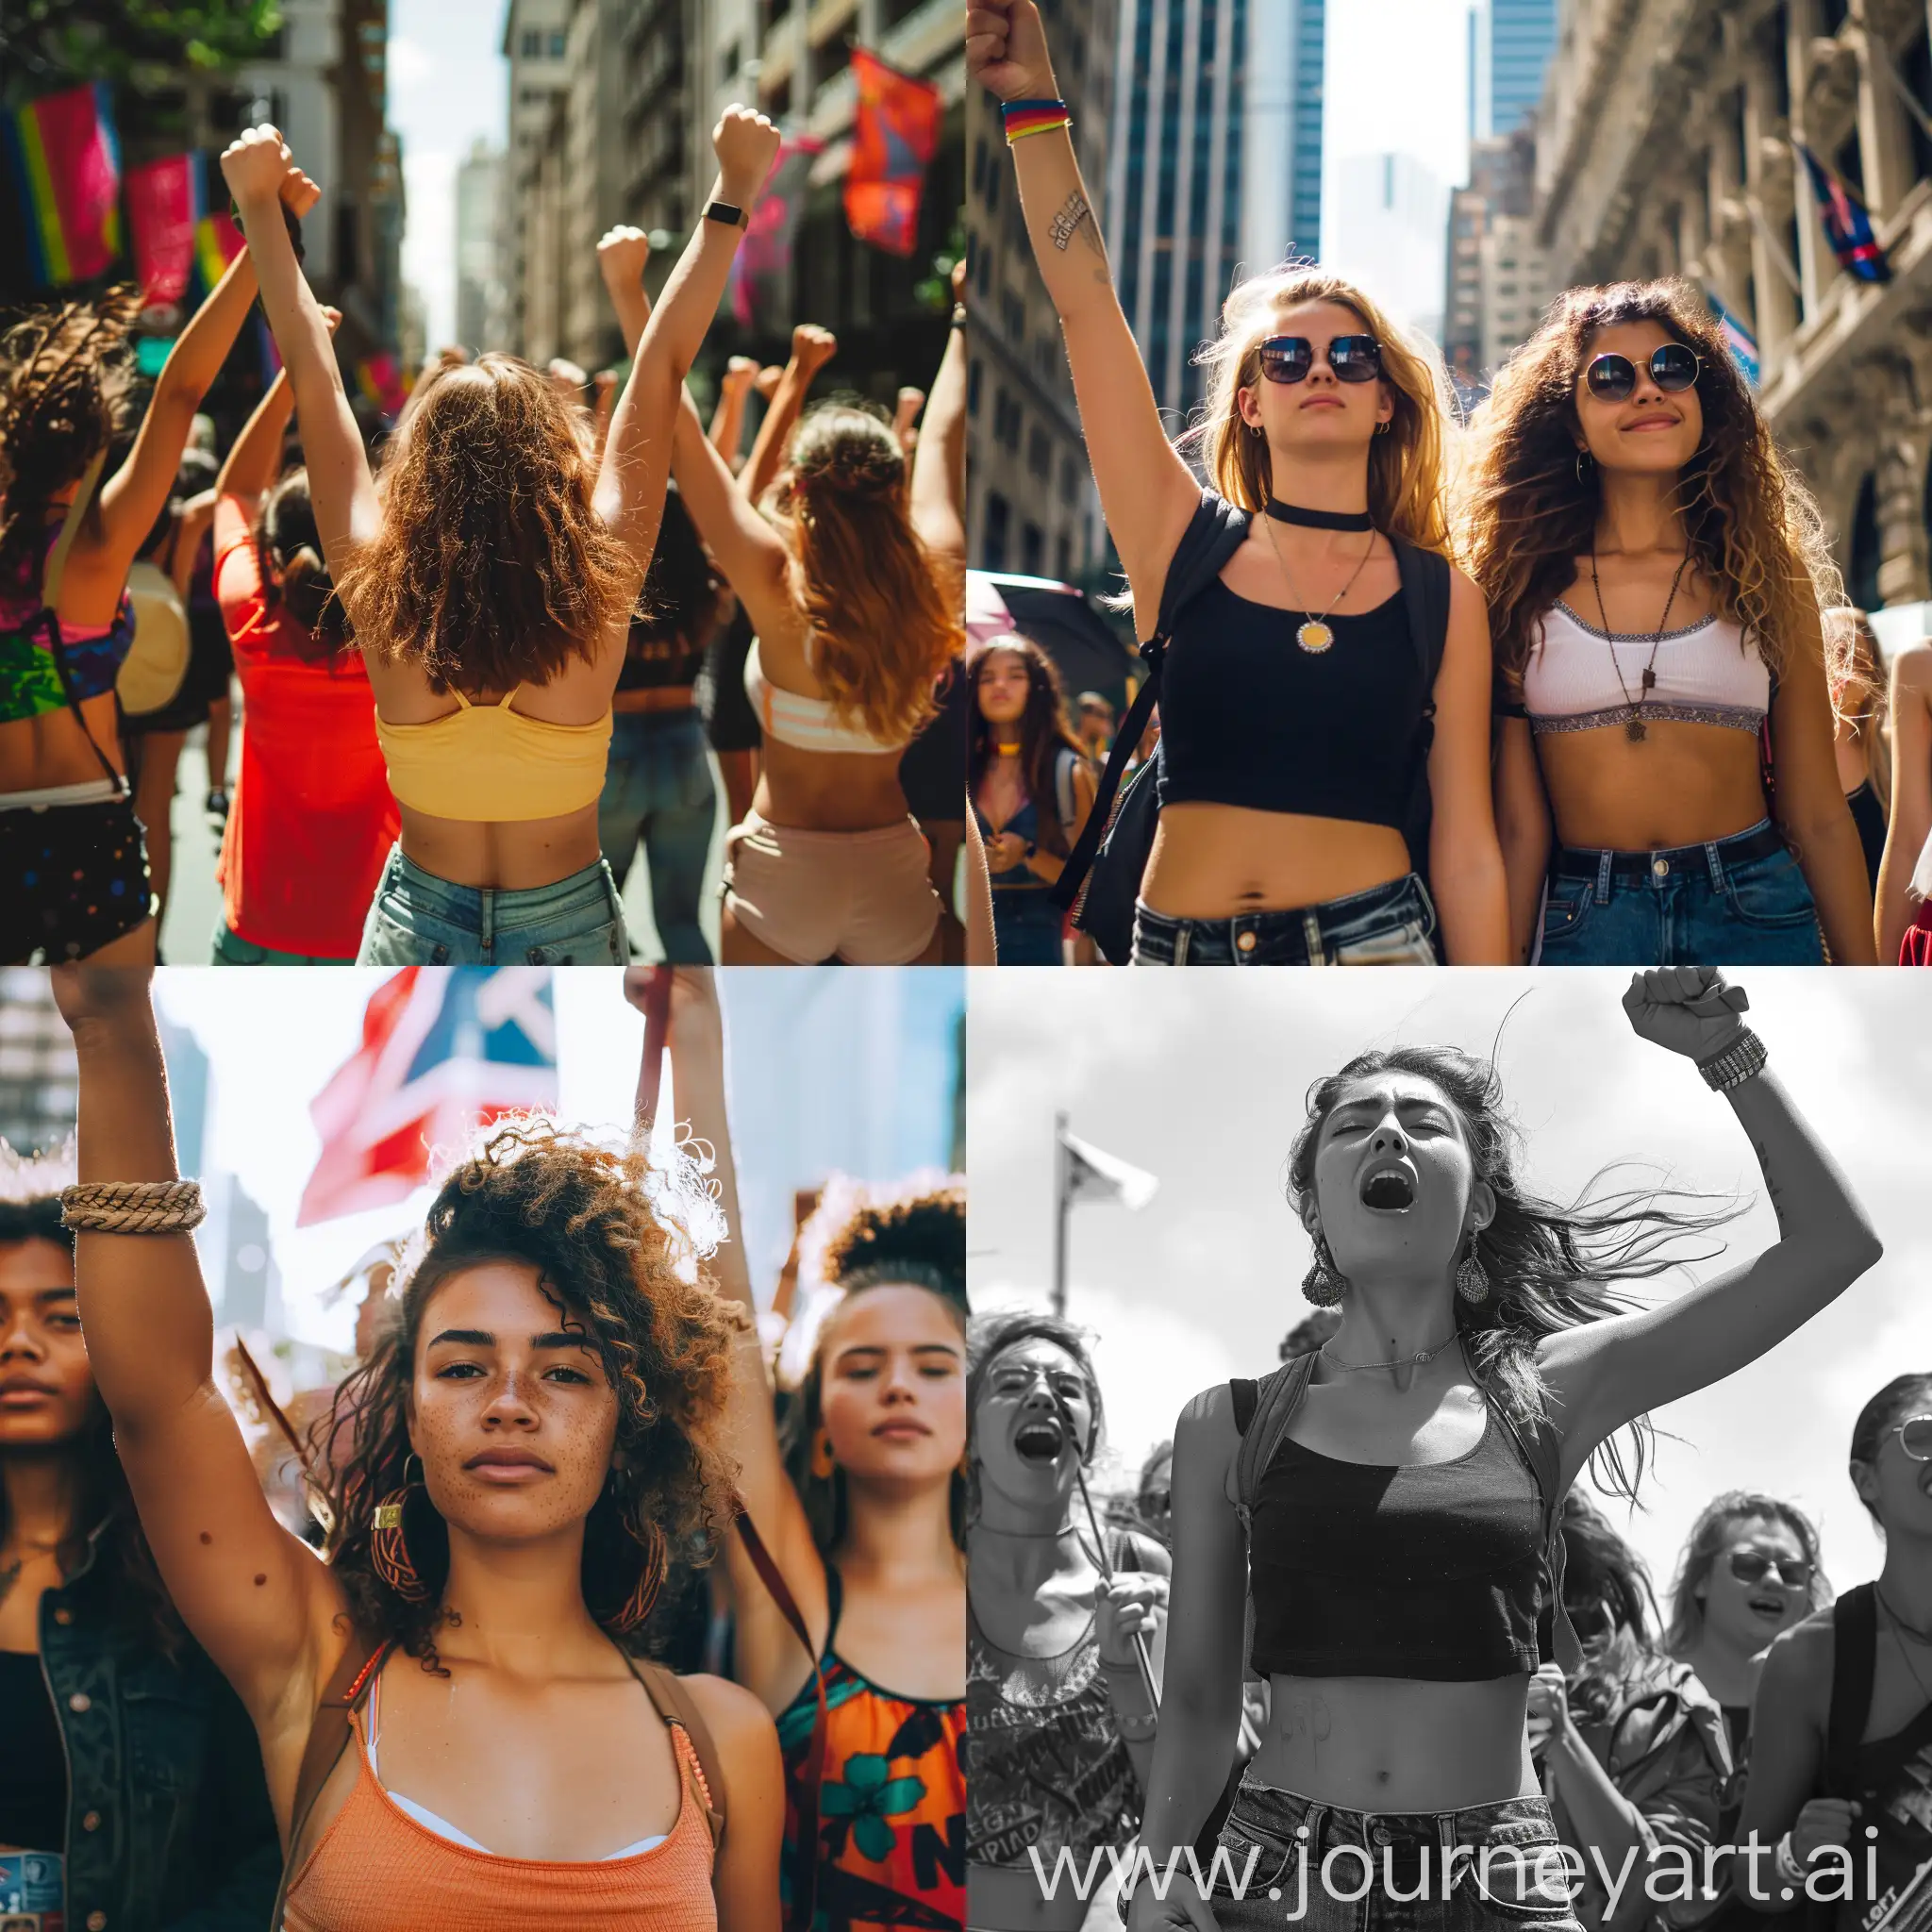 Empowered-Girls-Protesting-for-Freedom-in-CropTops